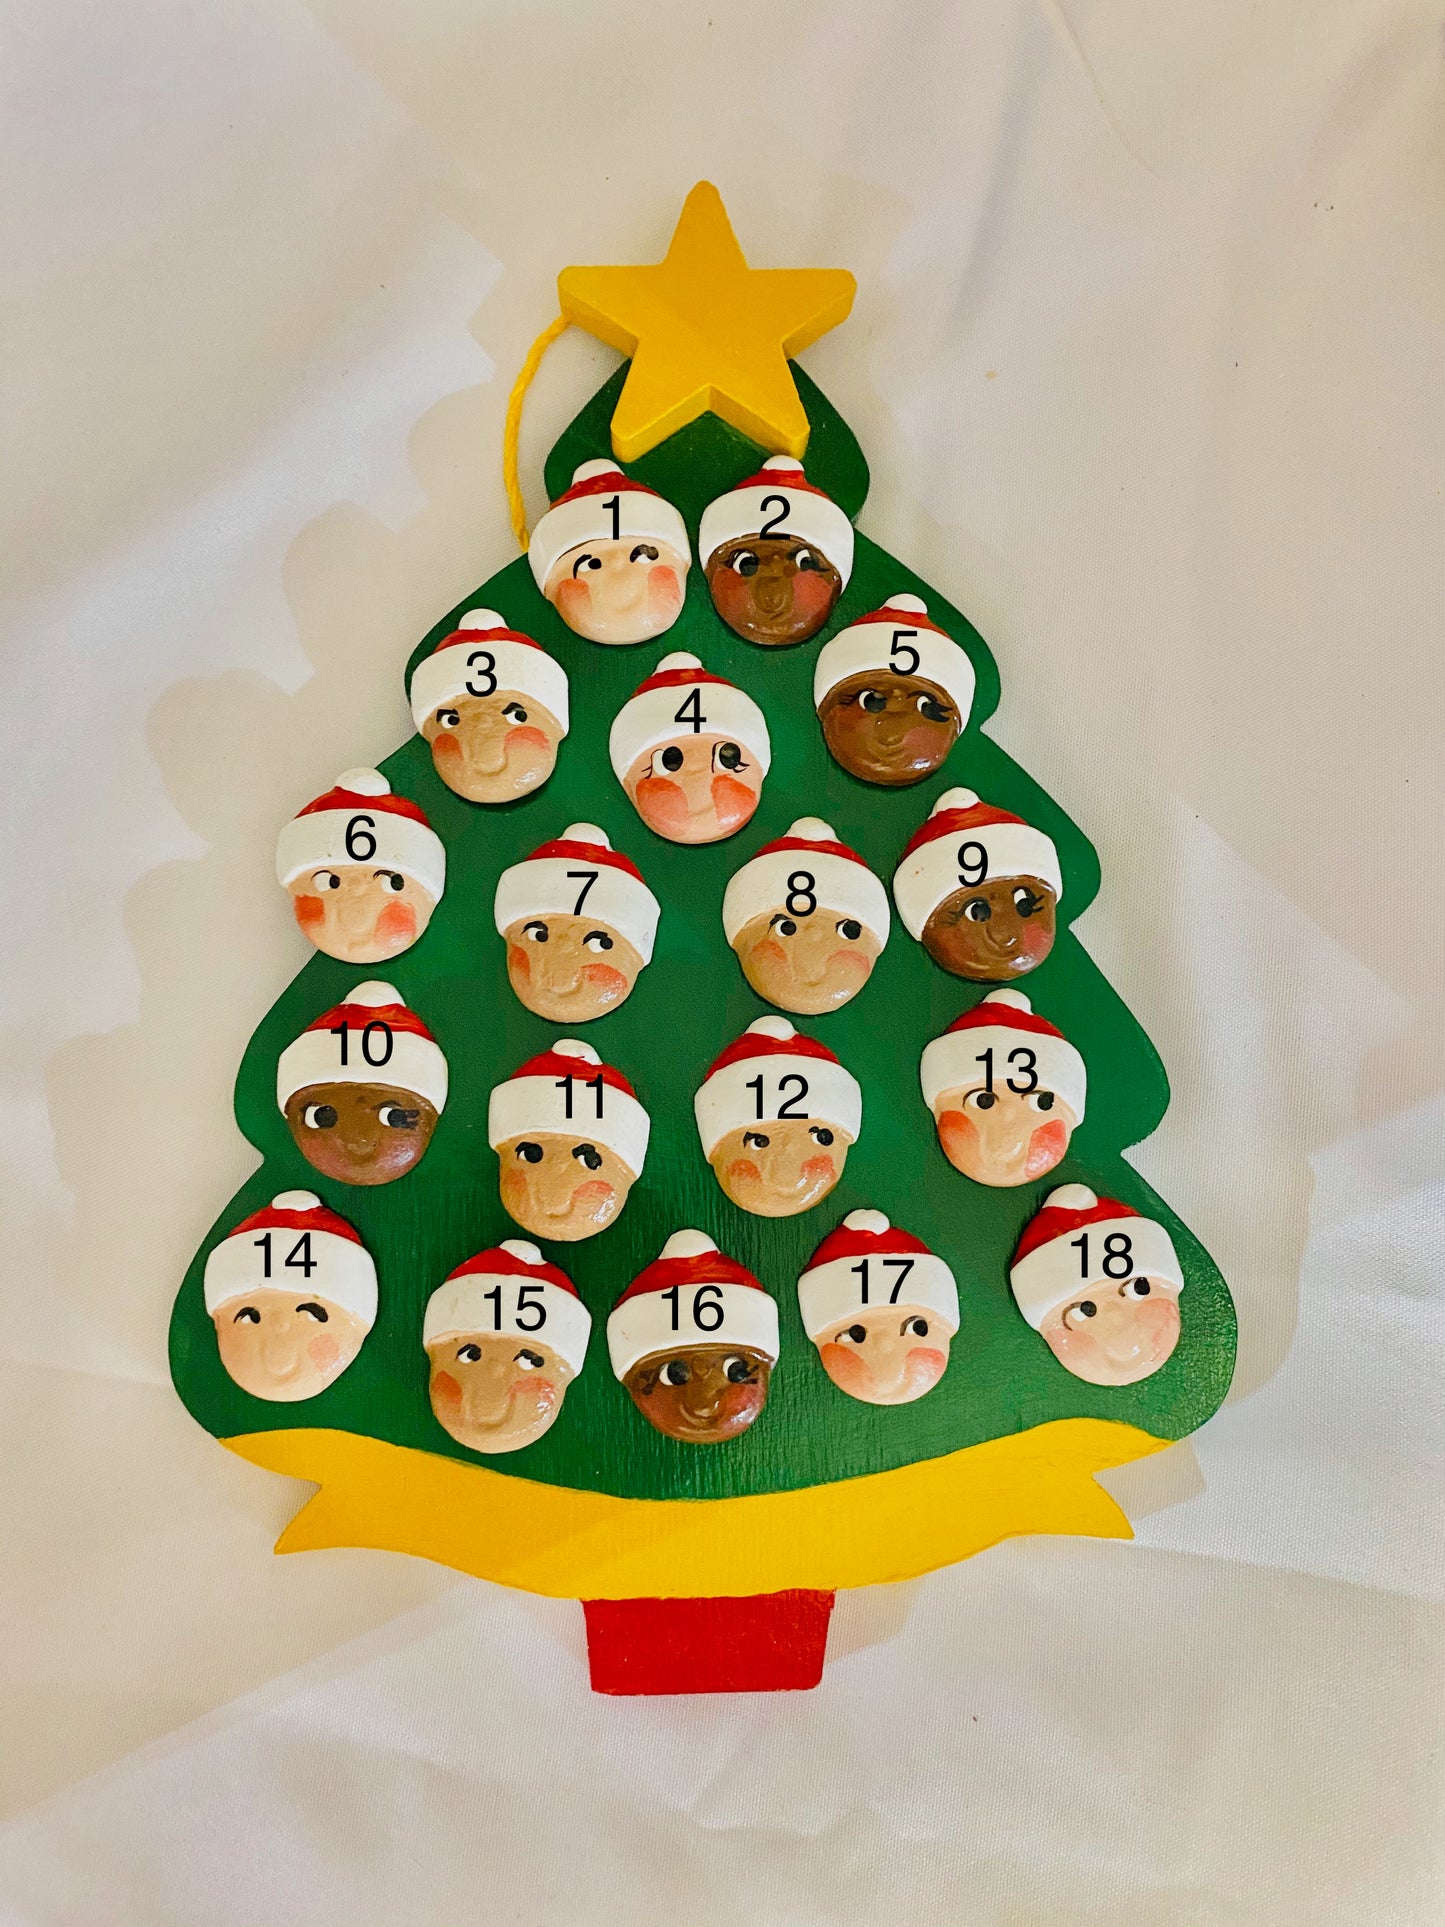 Personalized Ornament 18 Santa Faces on a Christmas Tree 7.5" x 6"